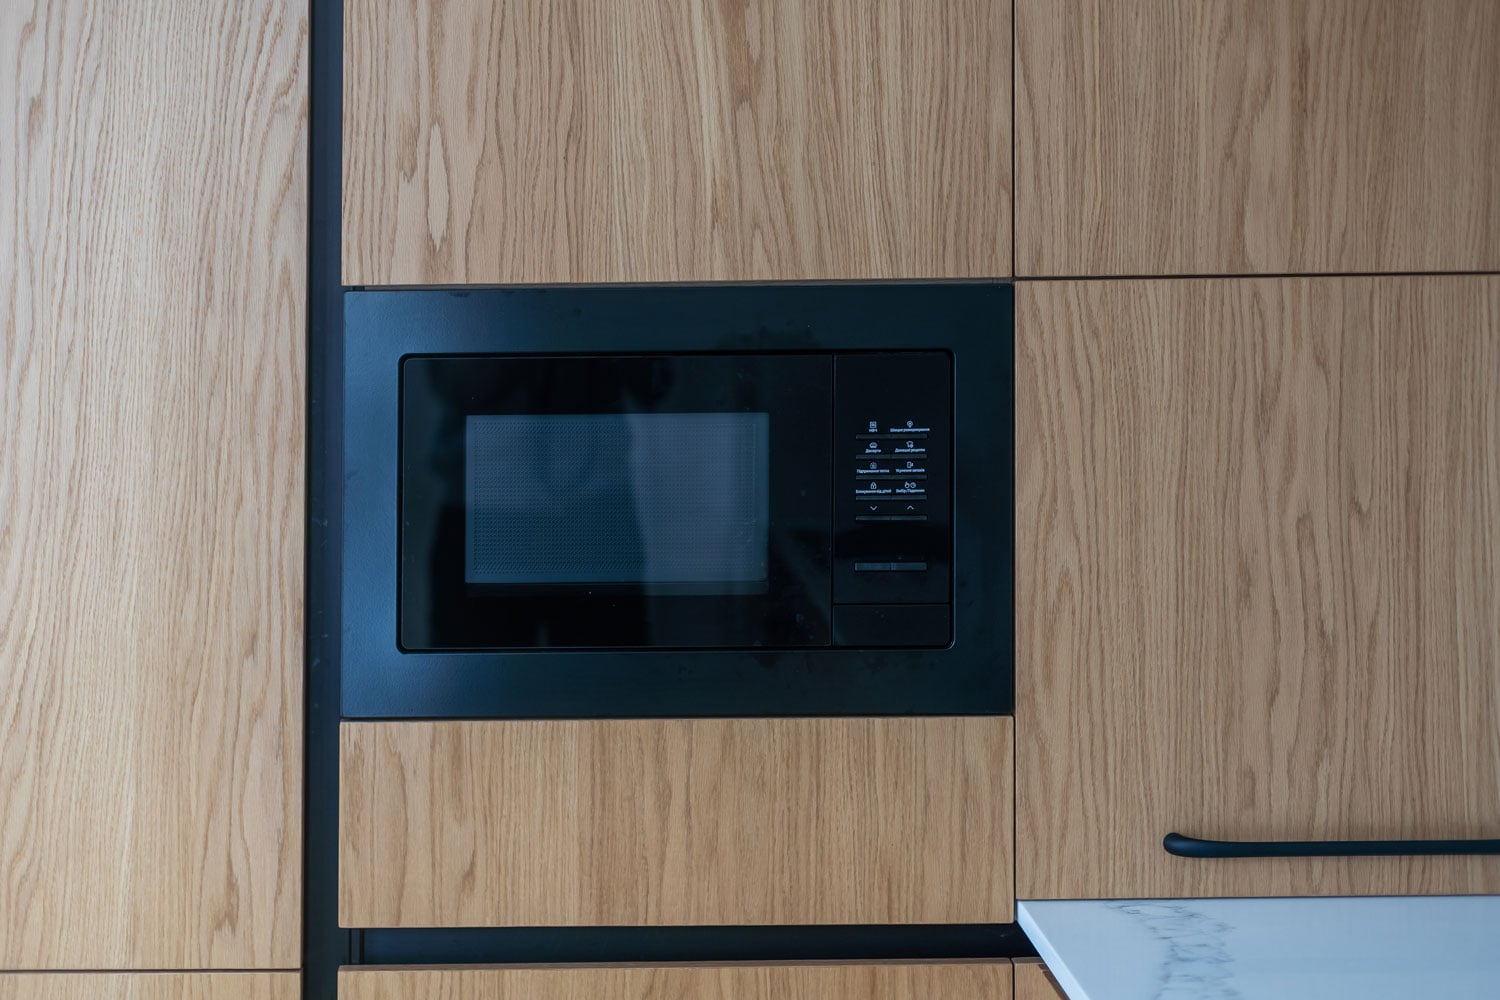 A built-in microwave in the kitchen